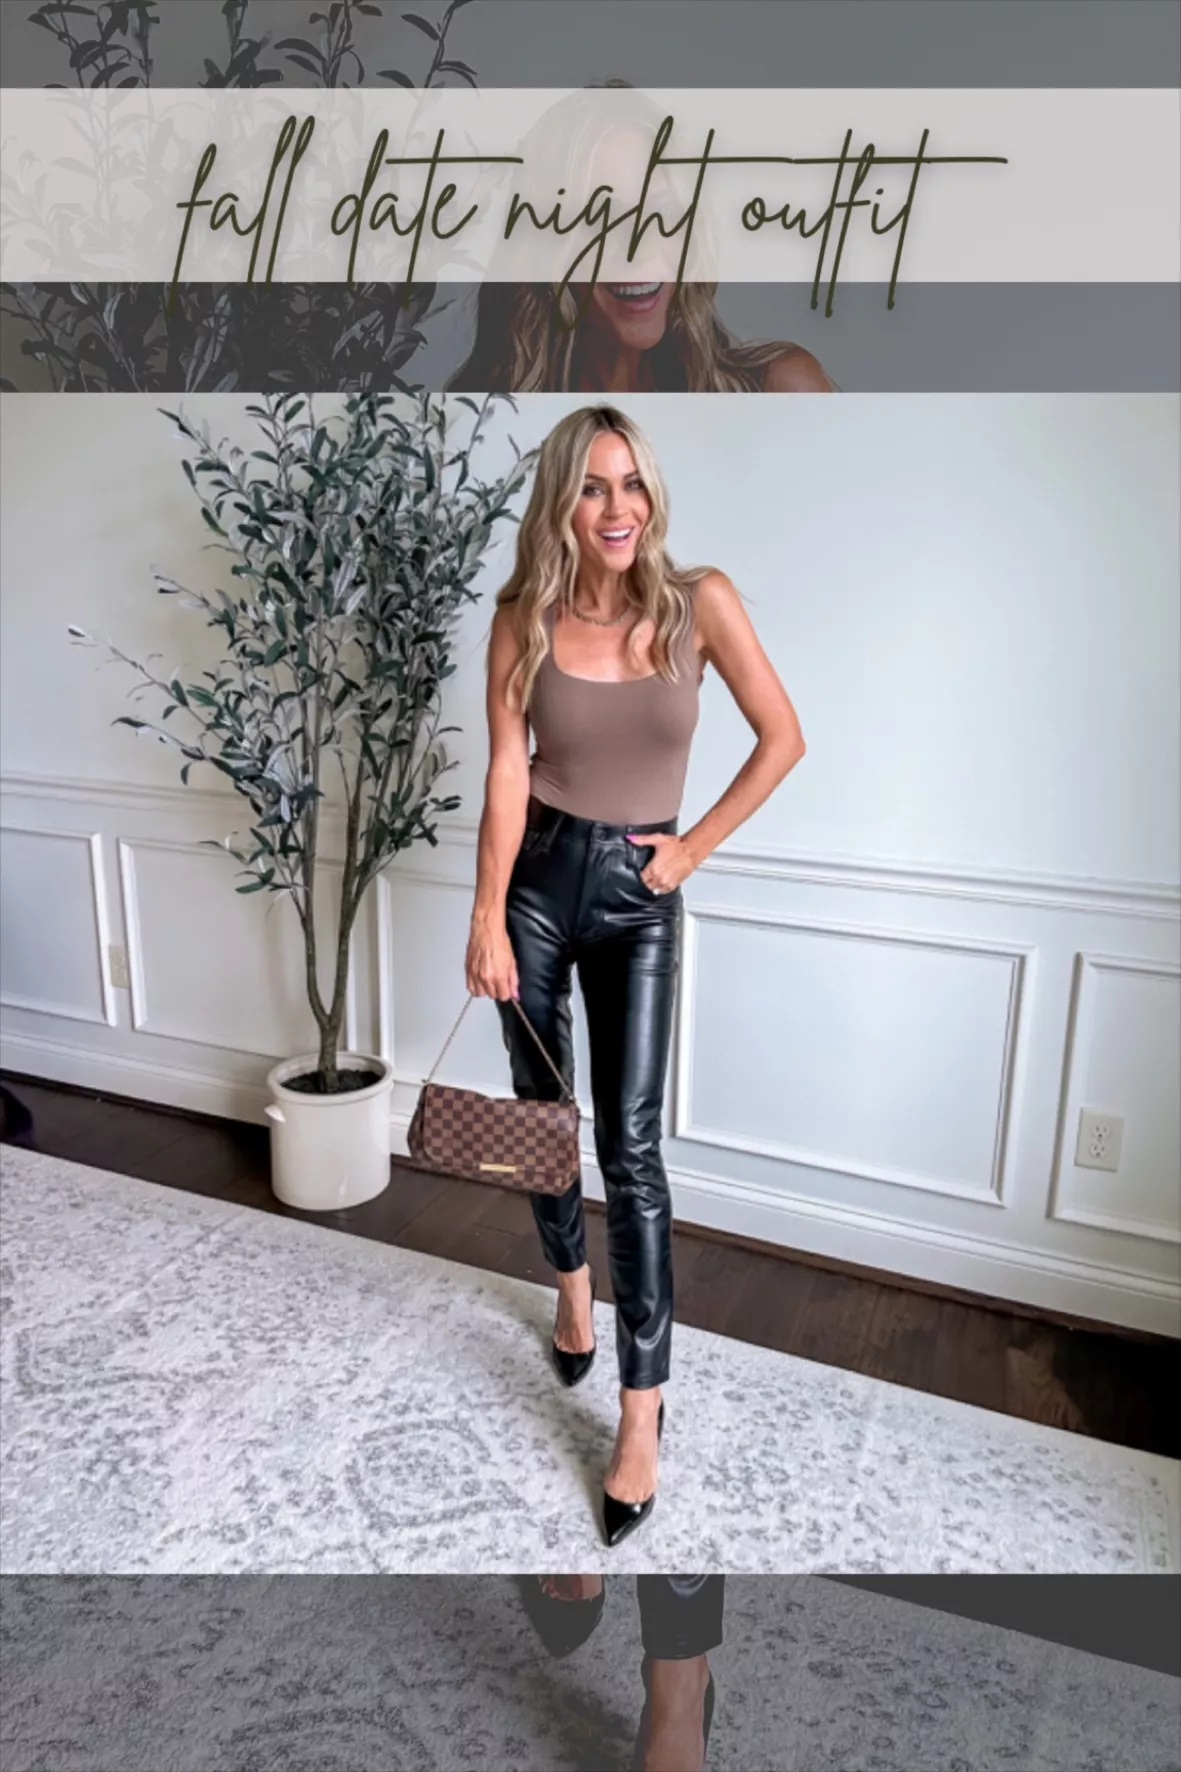 Vegan Leather Skinny Pant curated on LTK